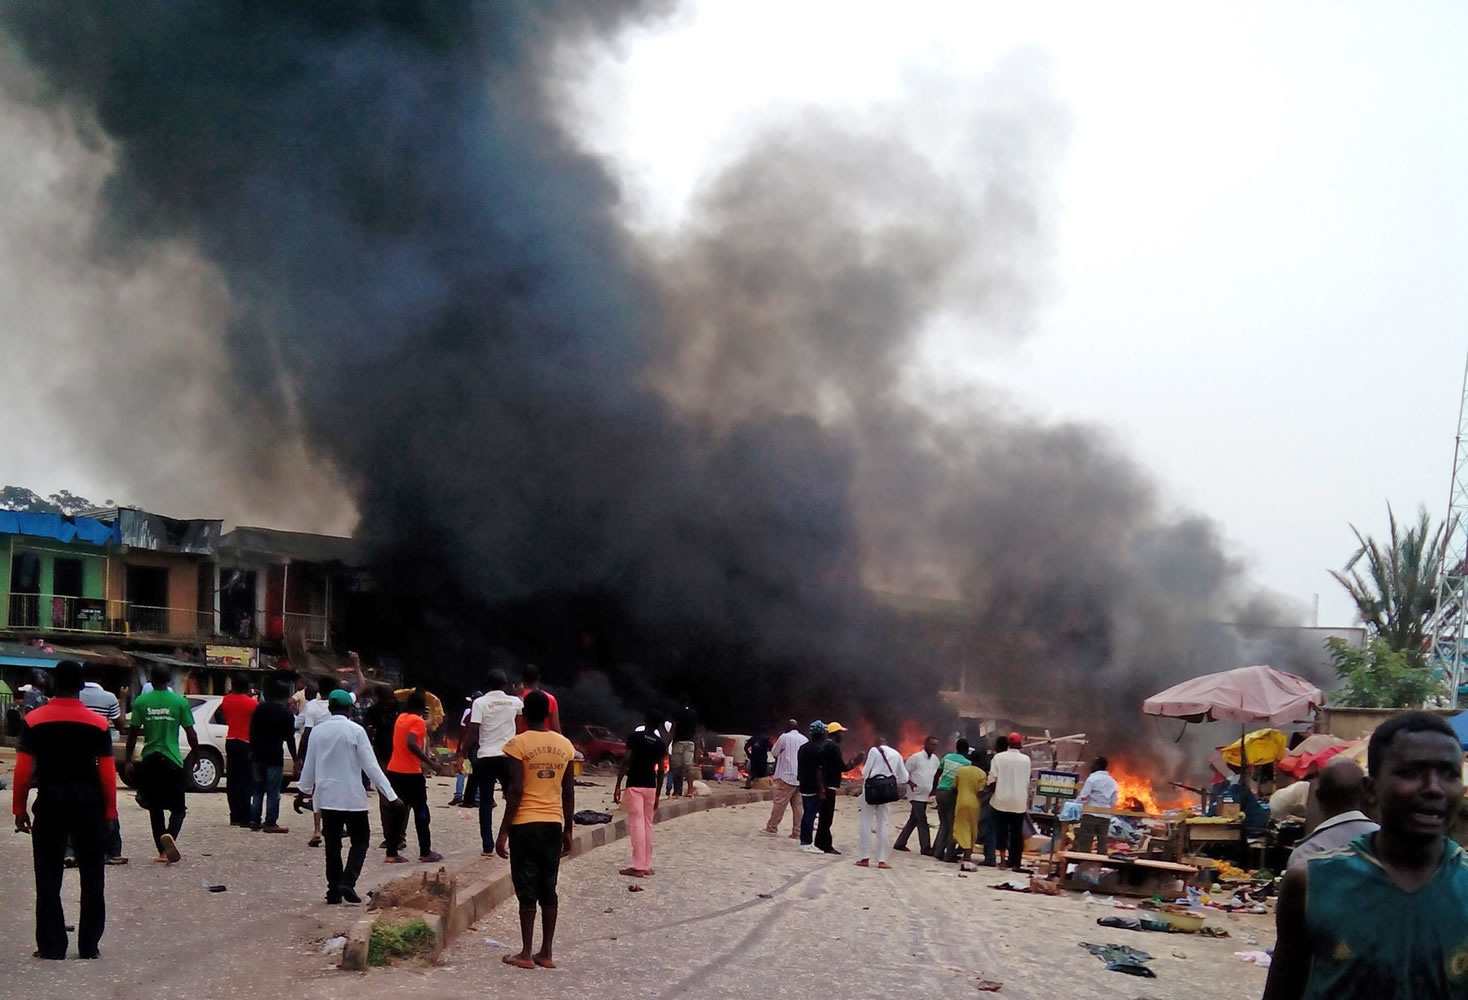 Smoke rises after a bomb blast at a bus terminal in Jos, Nigeria on Tuesday. Two explosions ripped through a bustling bus terminal and market frequented by thousands of people in Nigeria's central city of Jos on Tuesday afternoon, and police said there are an unknown number of casualties.